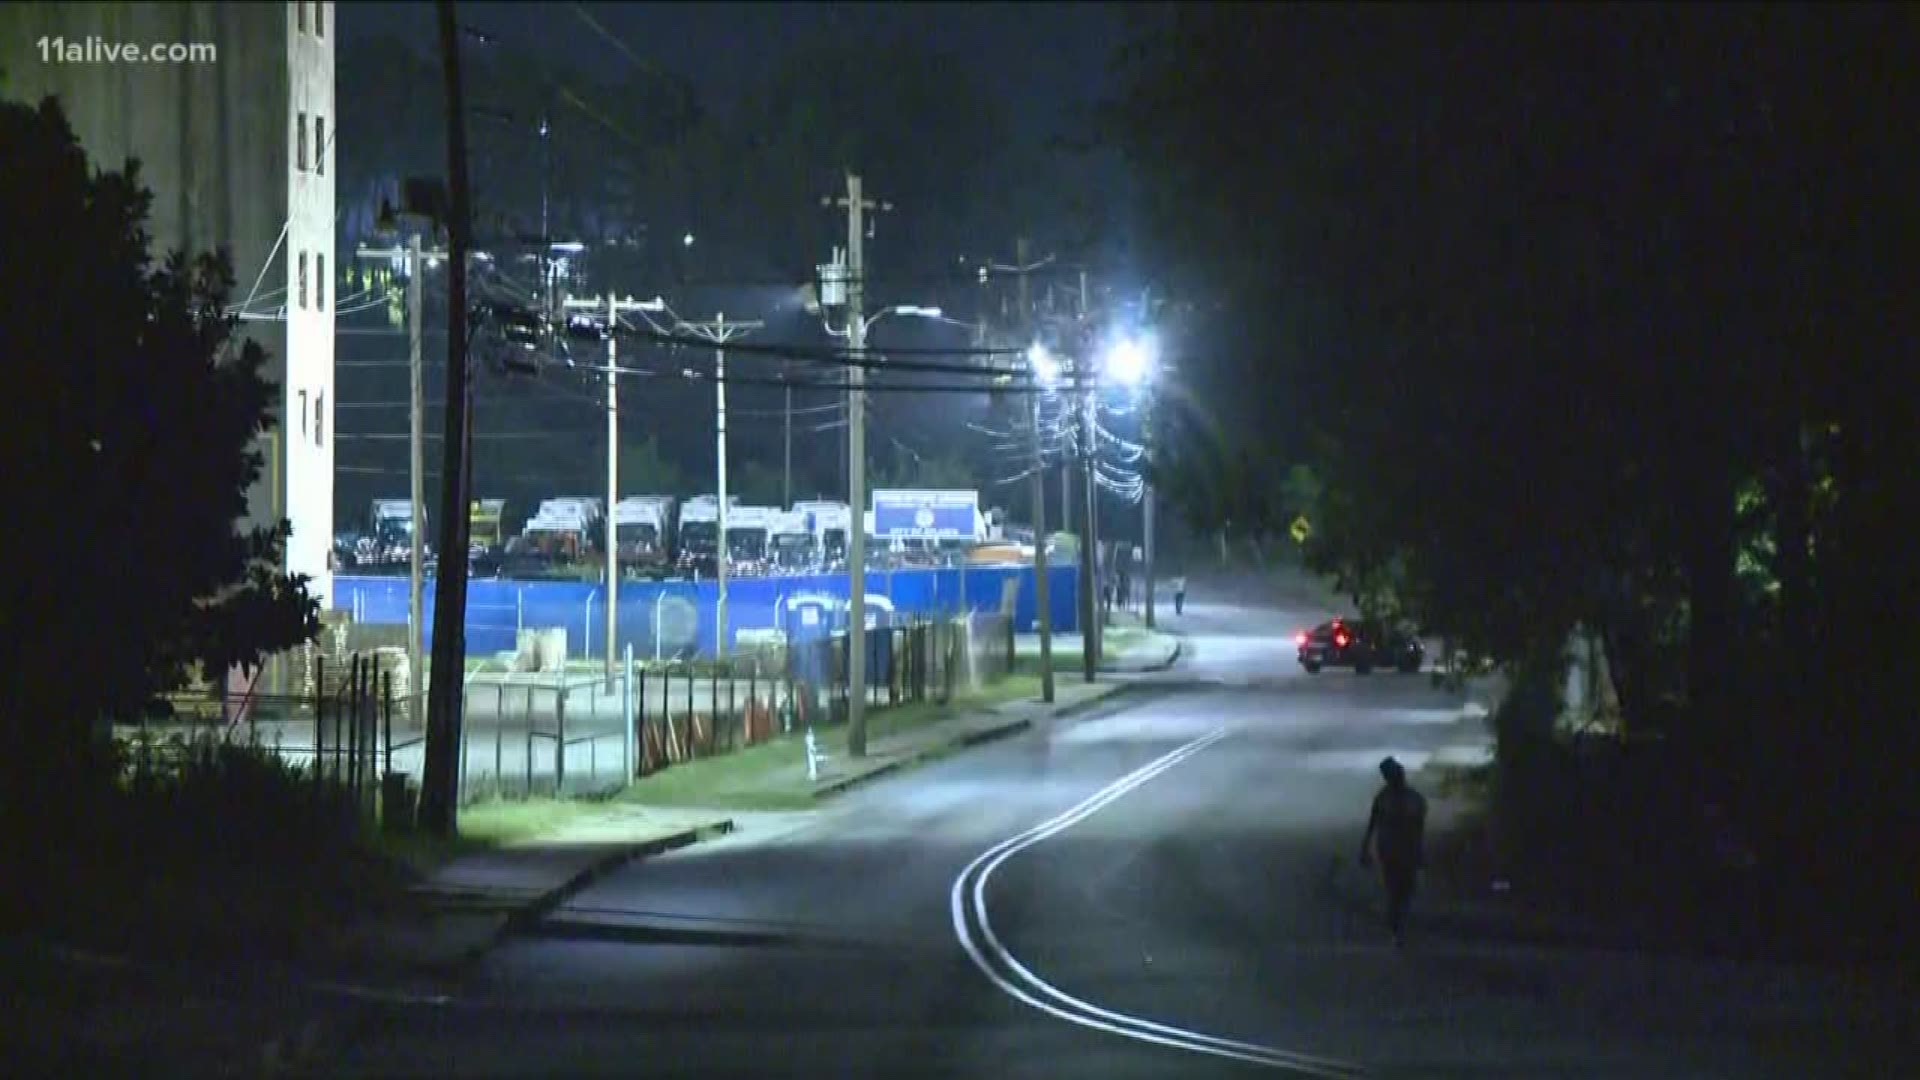 Atlanta Police are continuing their investigation of Saturday night's fight that escalated into gunfire after a high school football game between Mays and Carver at Lakewood Stadium. Investigators said there may be surveillance videos available from homes near where the shooting took place.